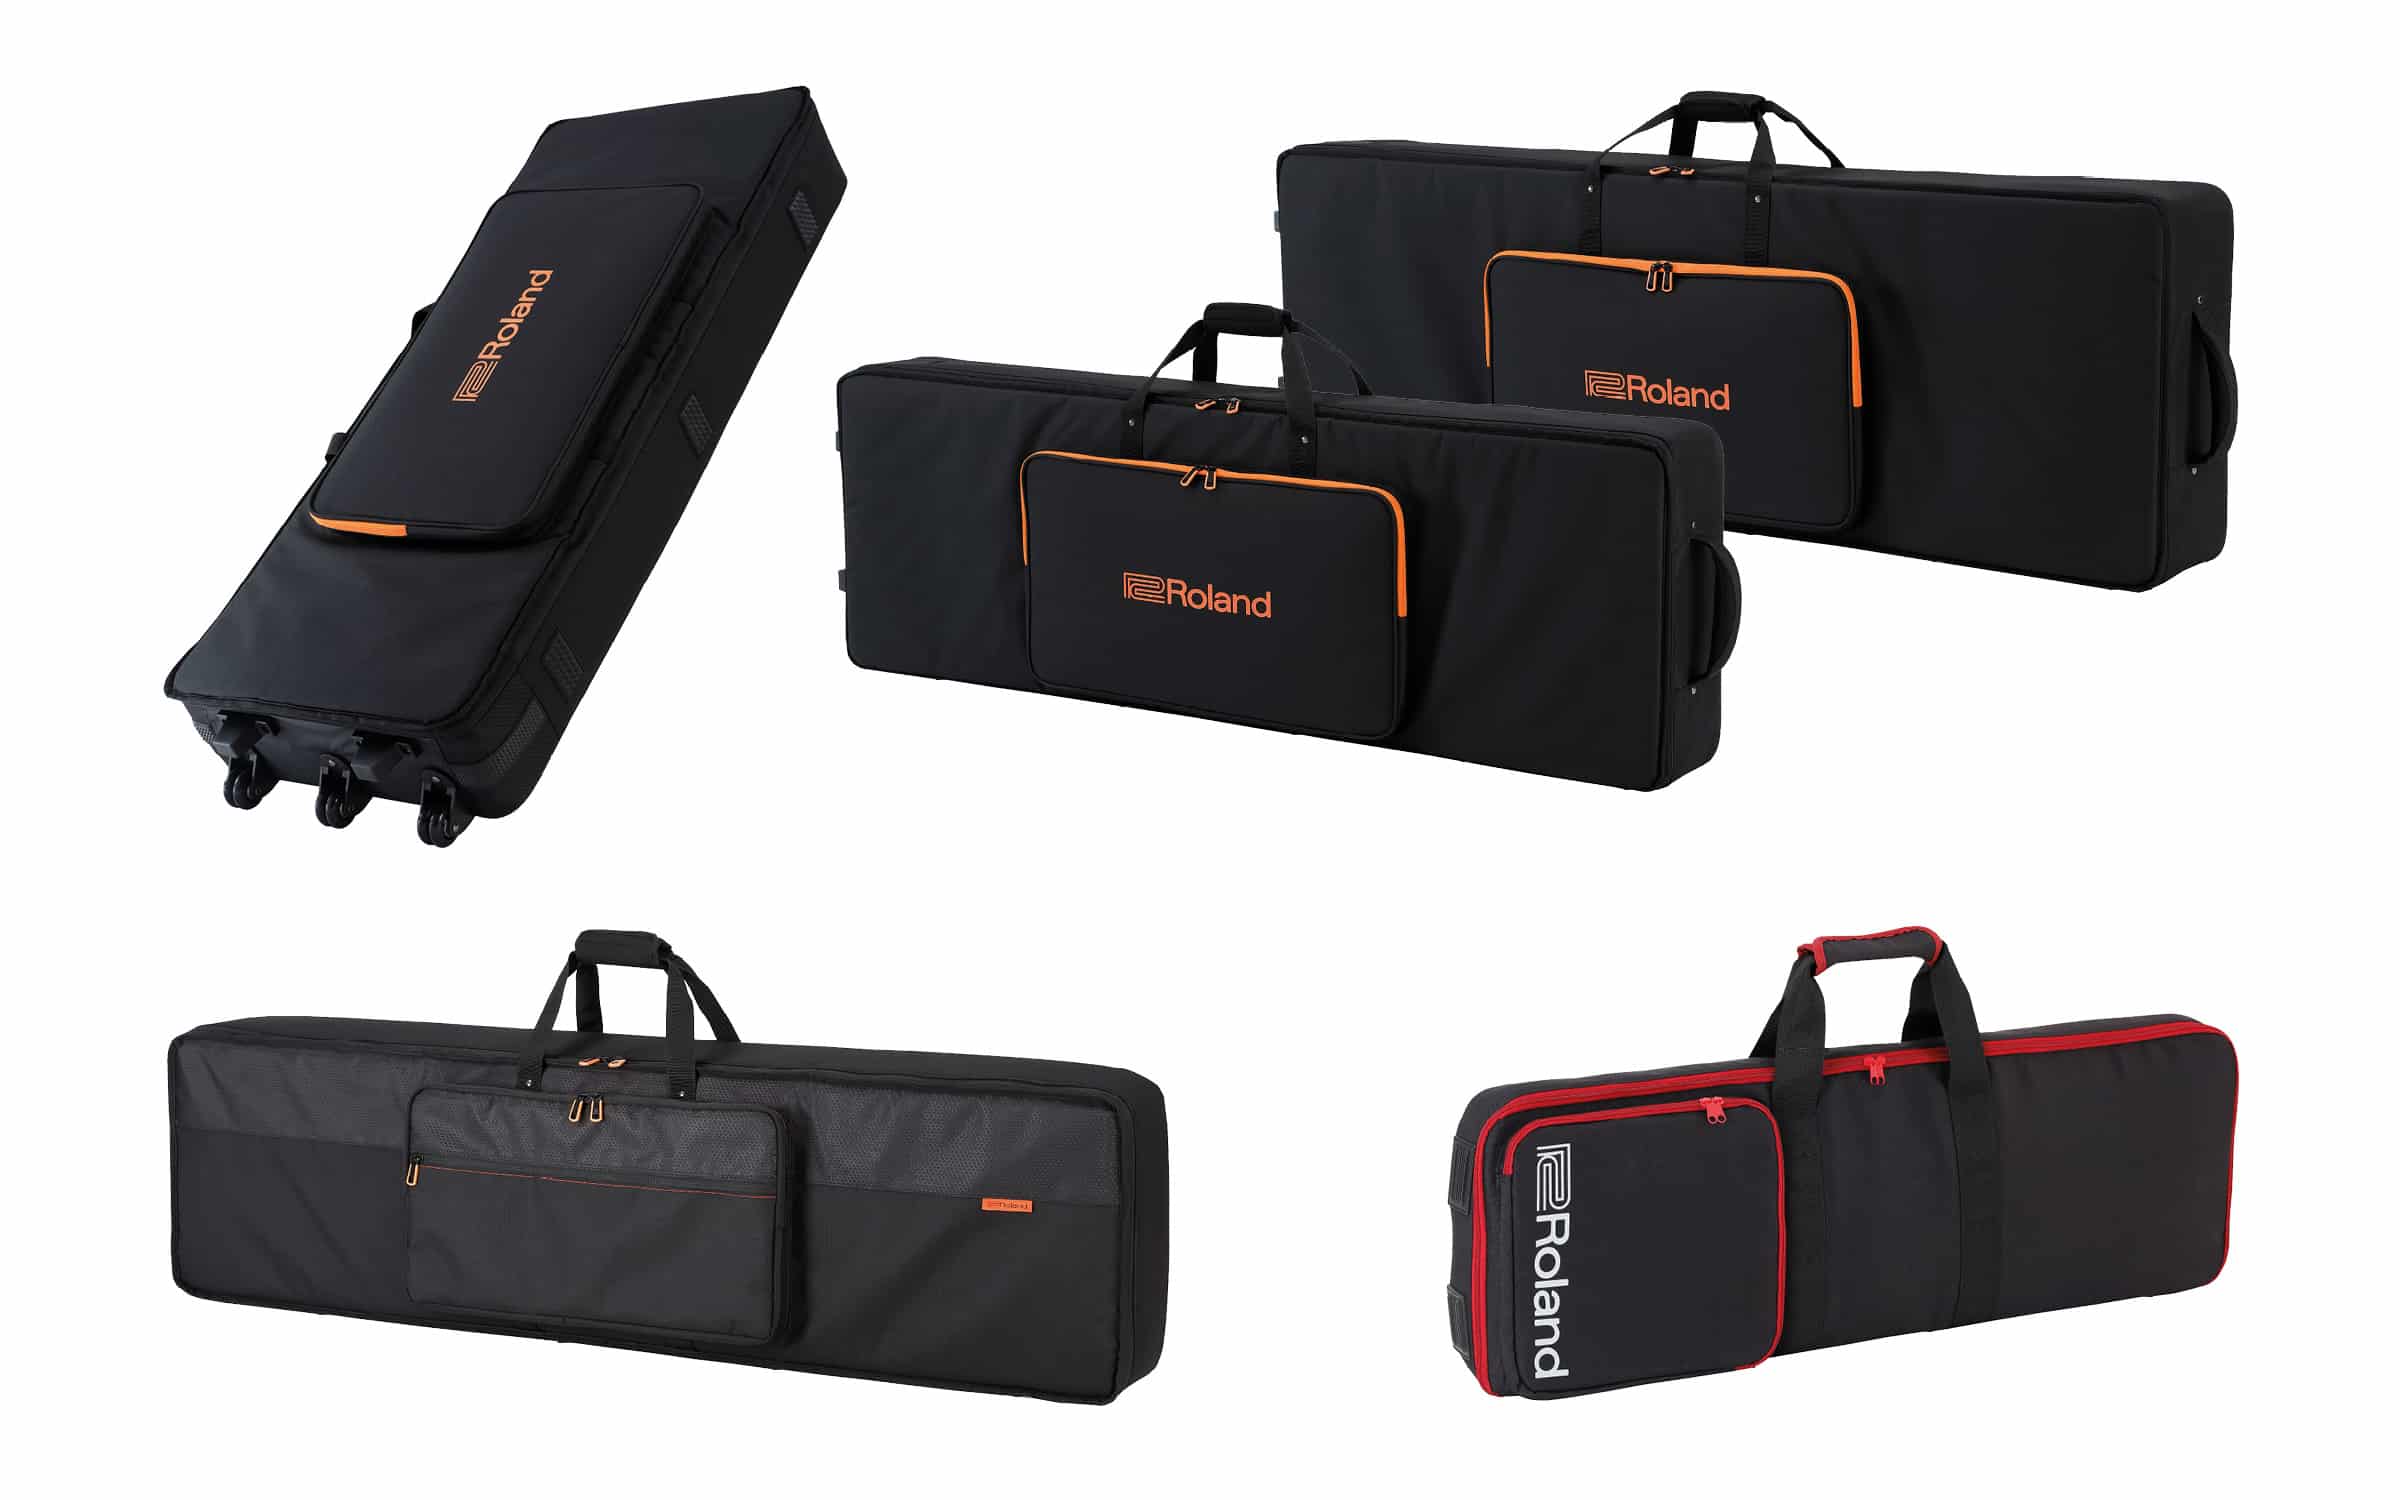 Roland Introduces New Keyboard Carrying Cases and Bags